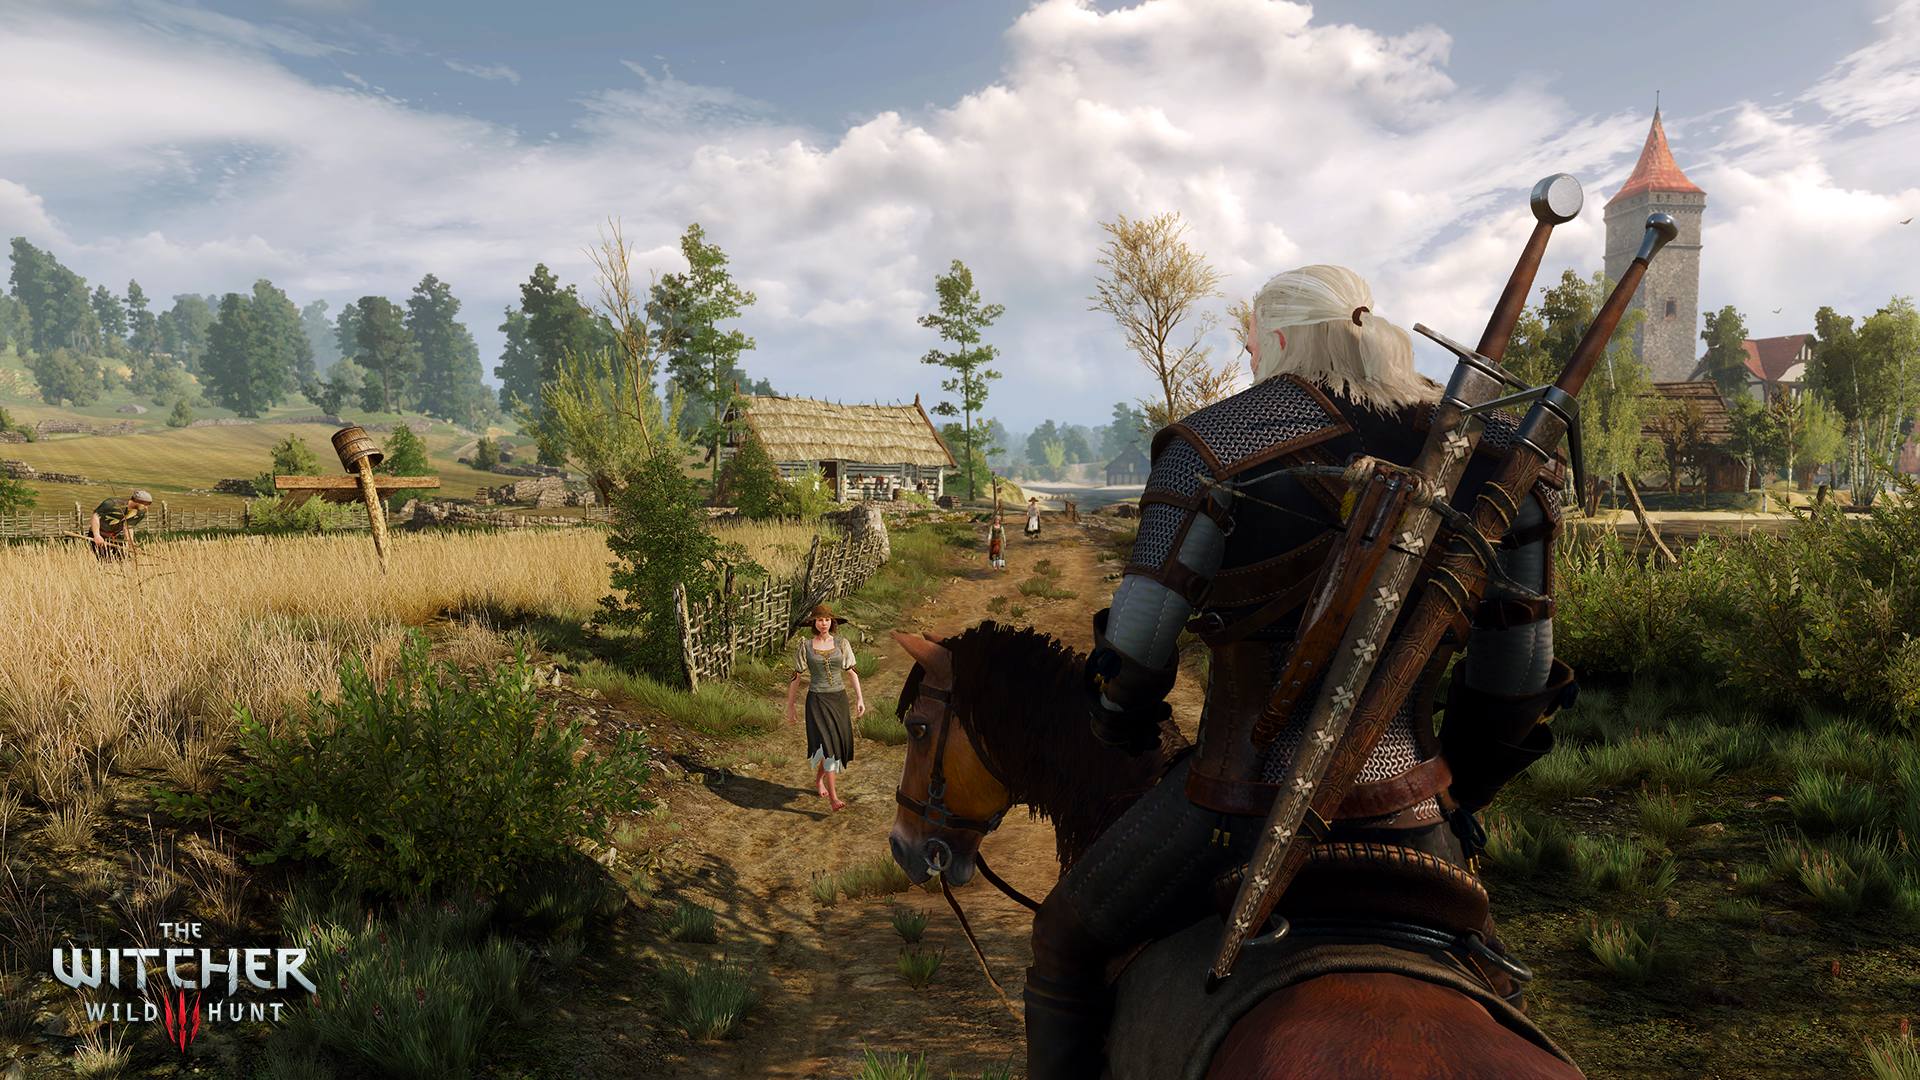 The_witcher_3_wild_hunt_seems_downright_bucolic Not_necessarily